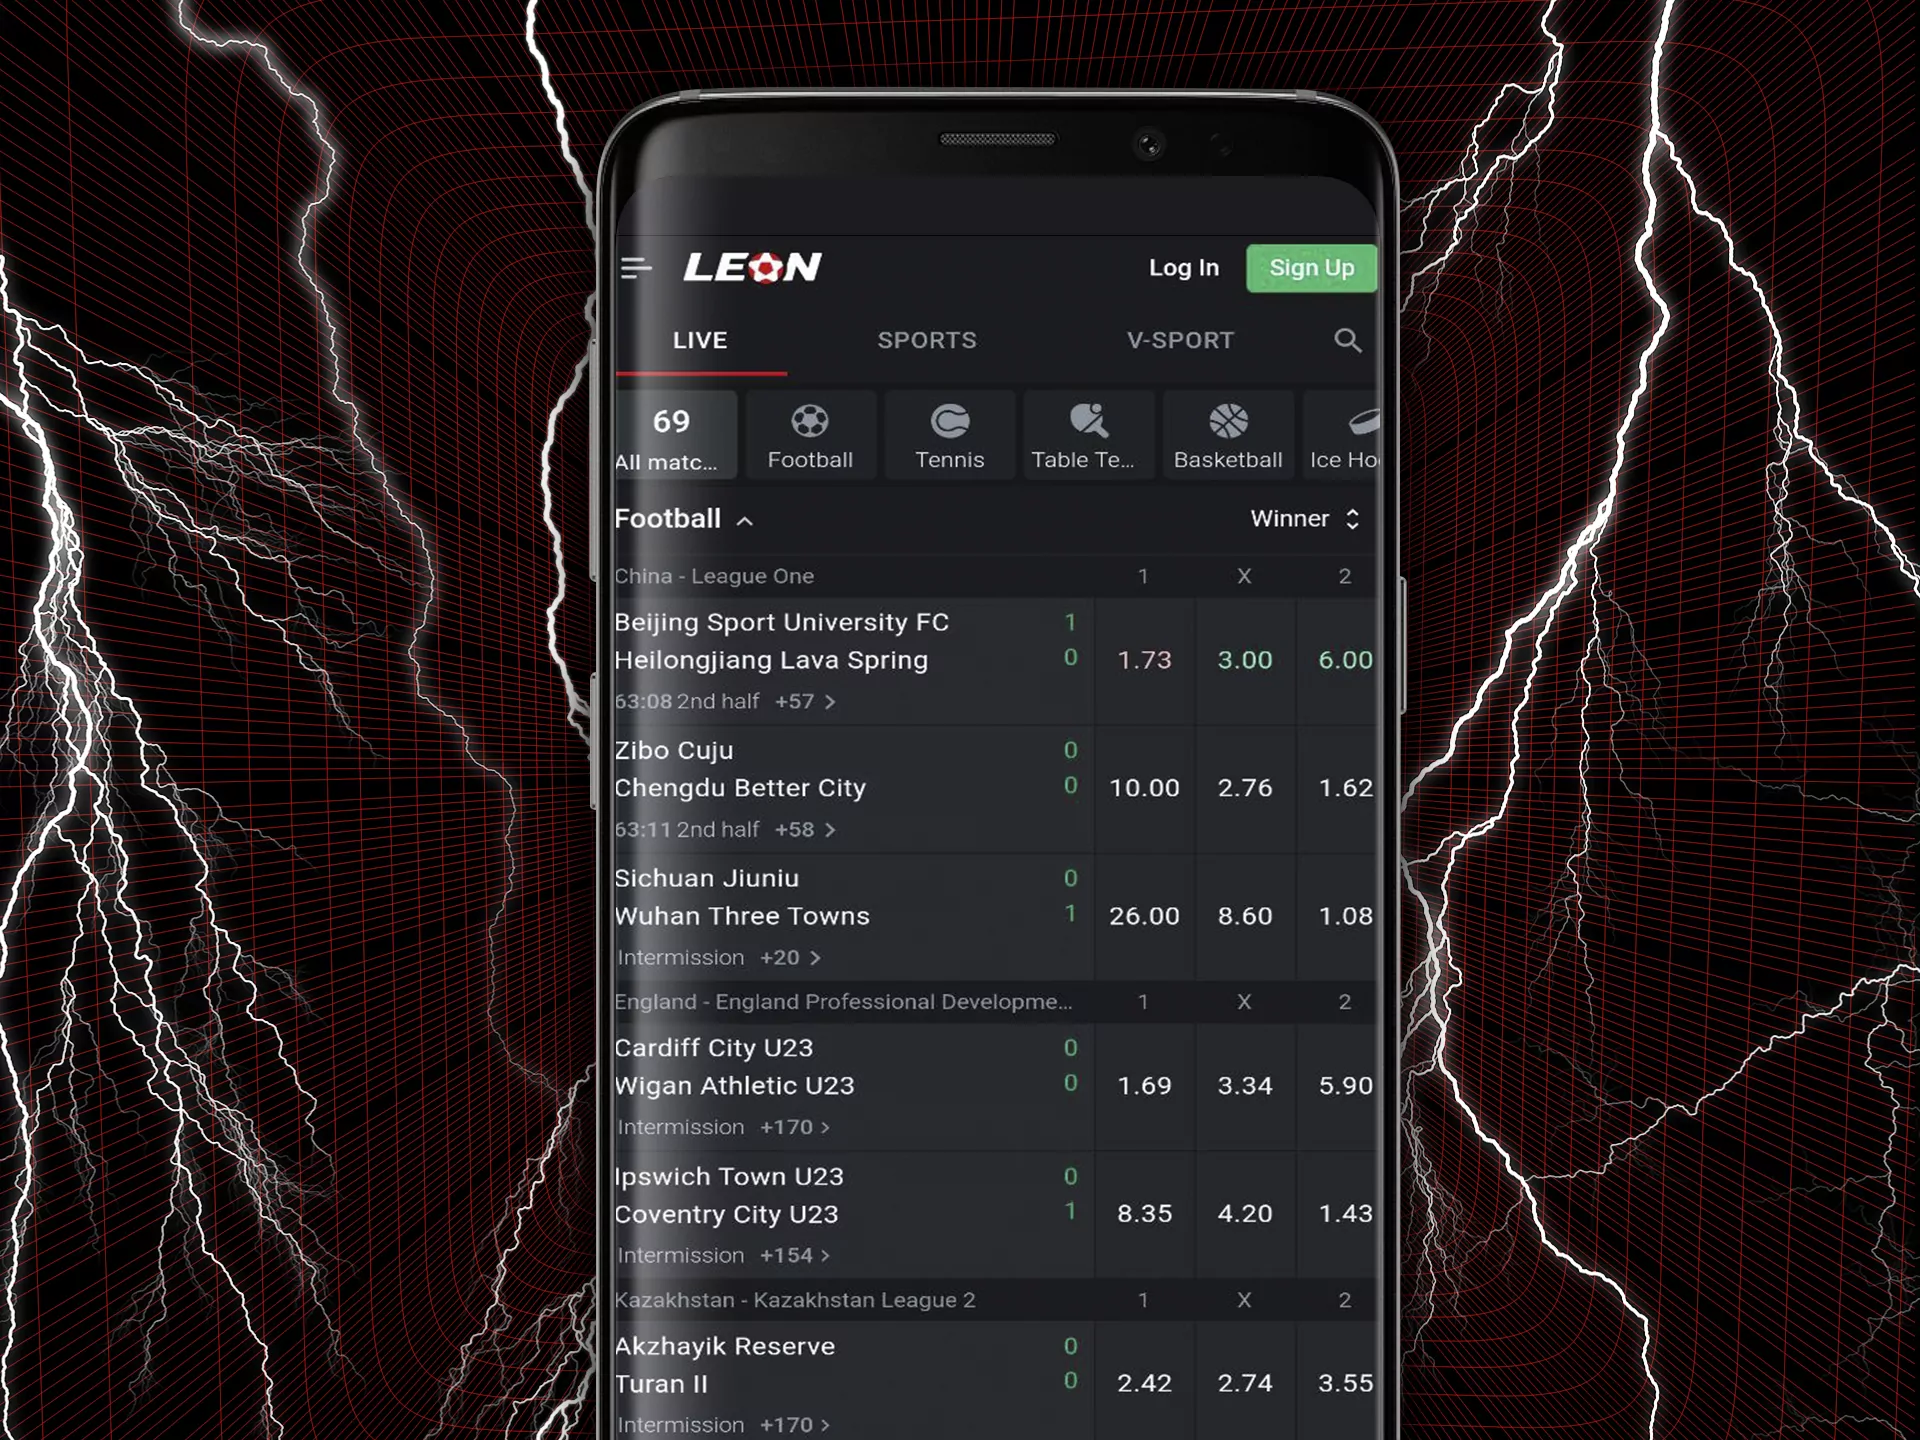 You can place bets in LIVE mode via the Leon apps.